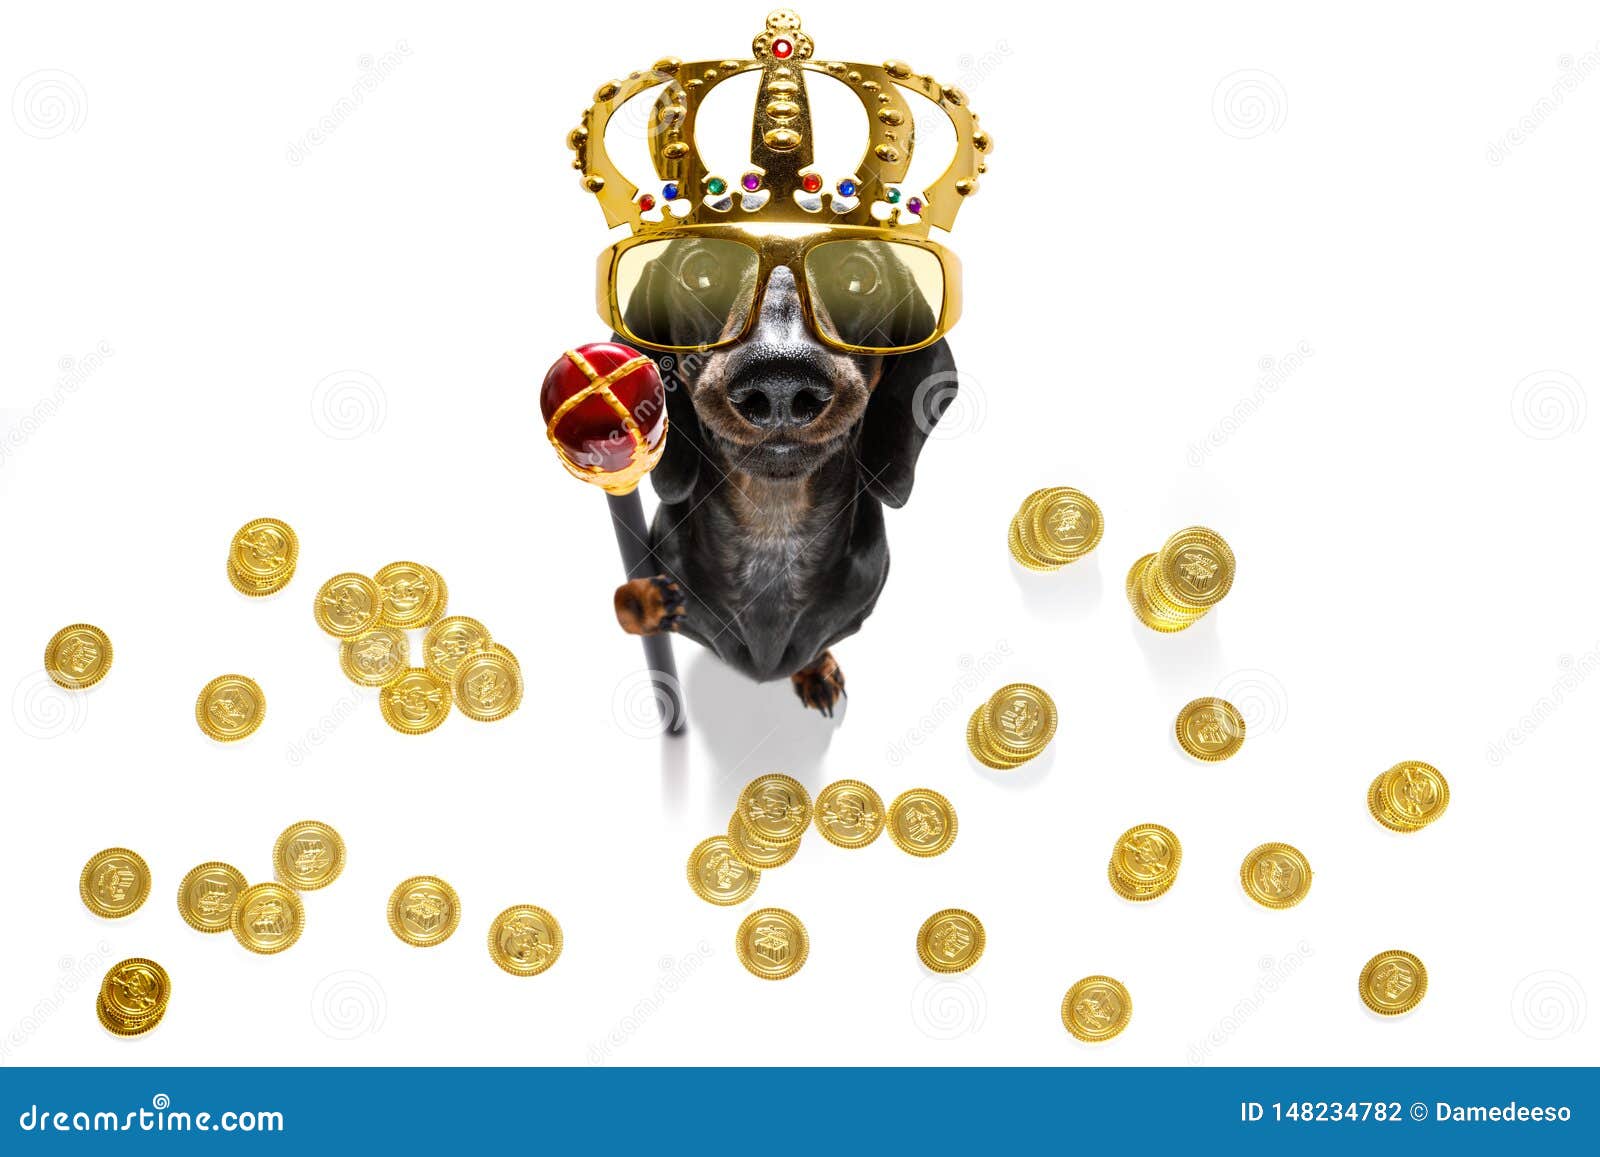 King rich money dog stock photo. Image of looking, cute - 148234782